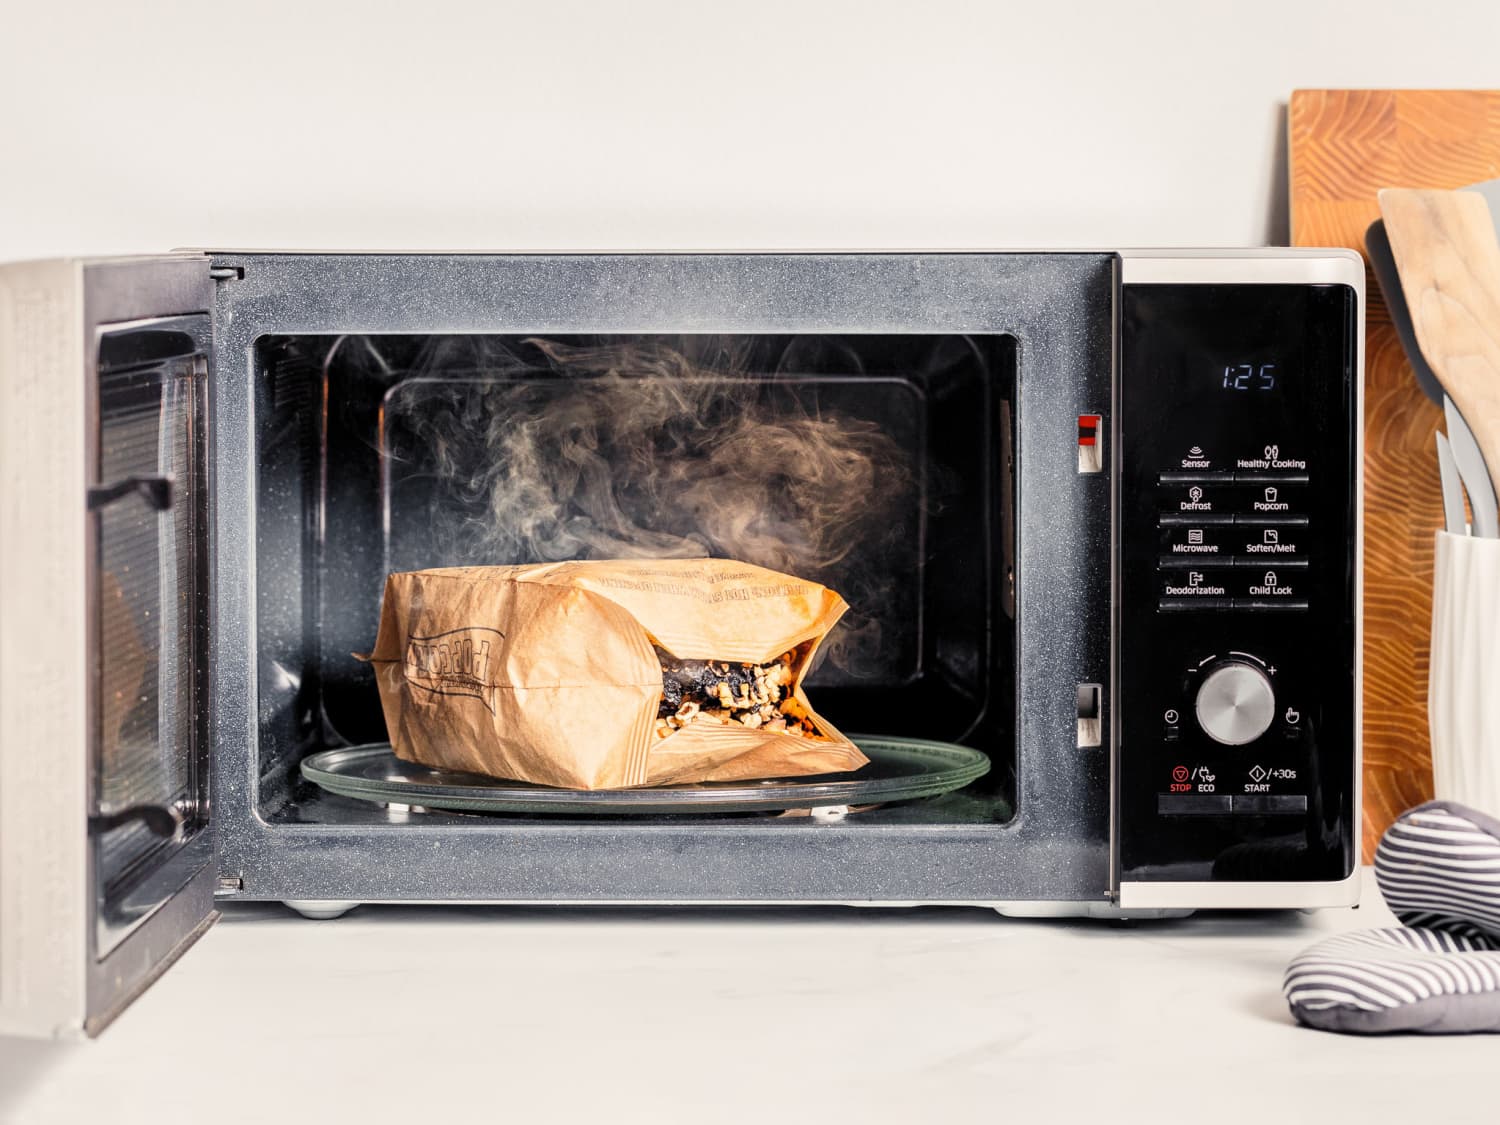 How to Clean Your Microwave: The Top 3 Microwave Cleaners 2020